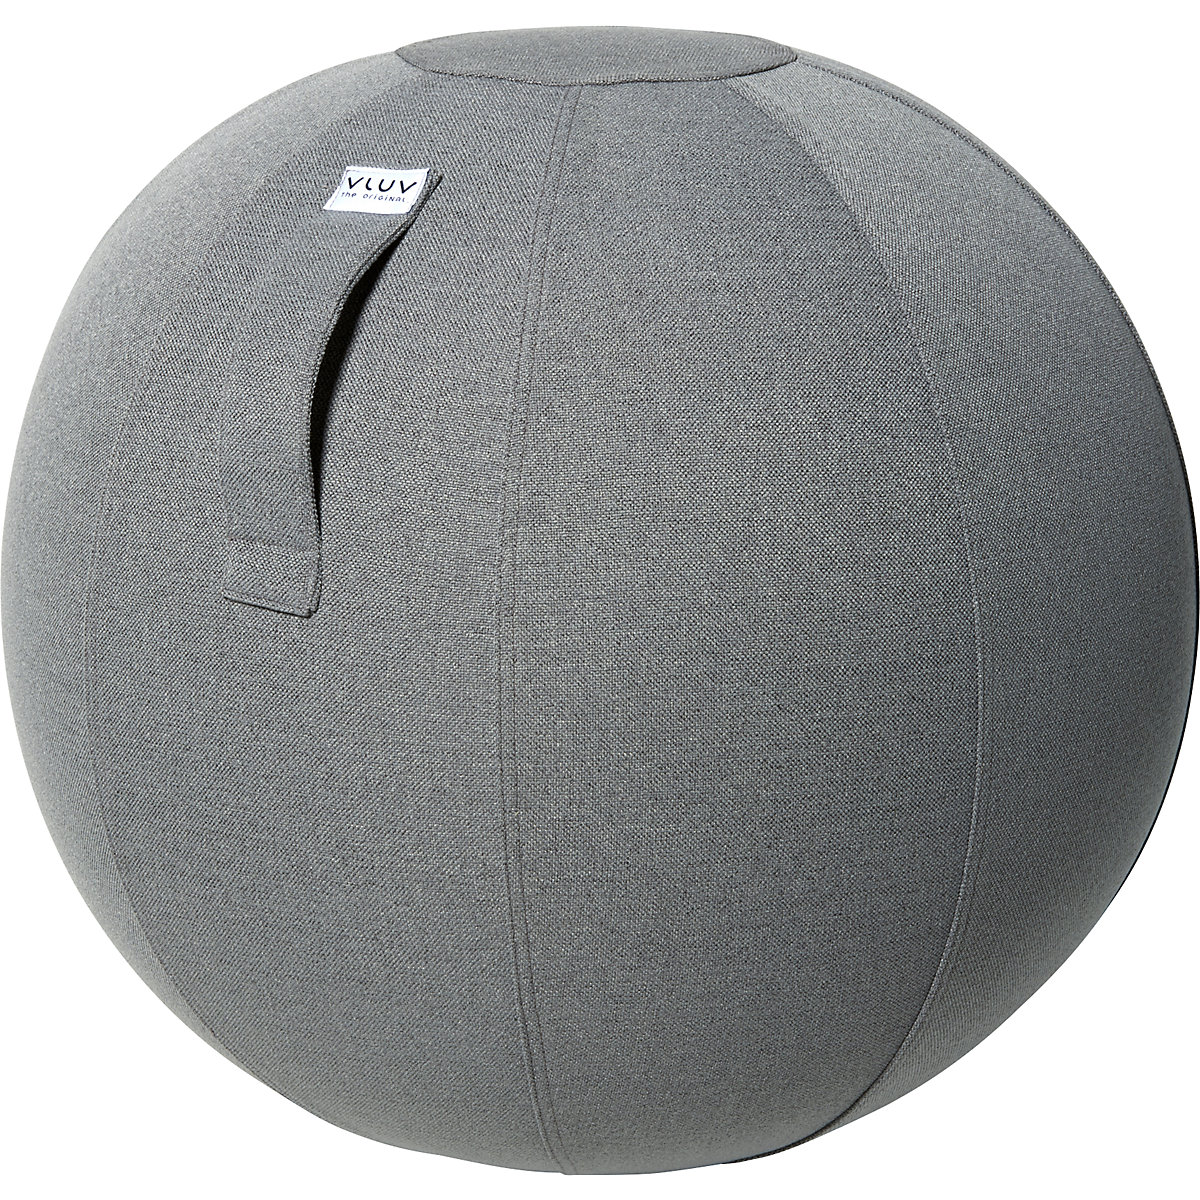 SOVA Swiss ball – VLUV, fabric cover in natural colours, 600 – 650 mm, ash grey